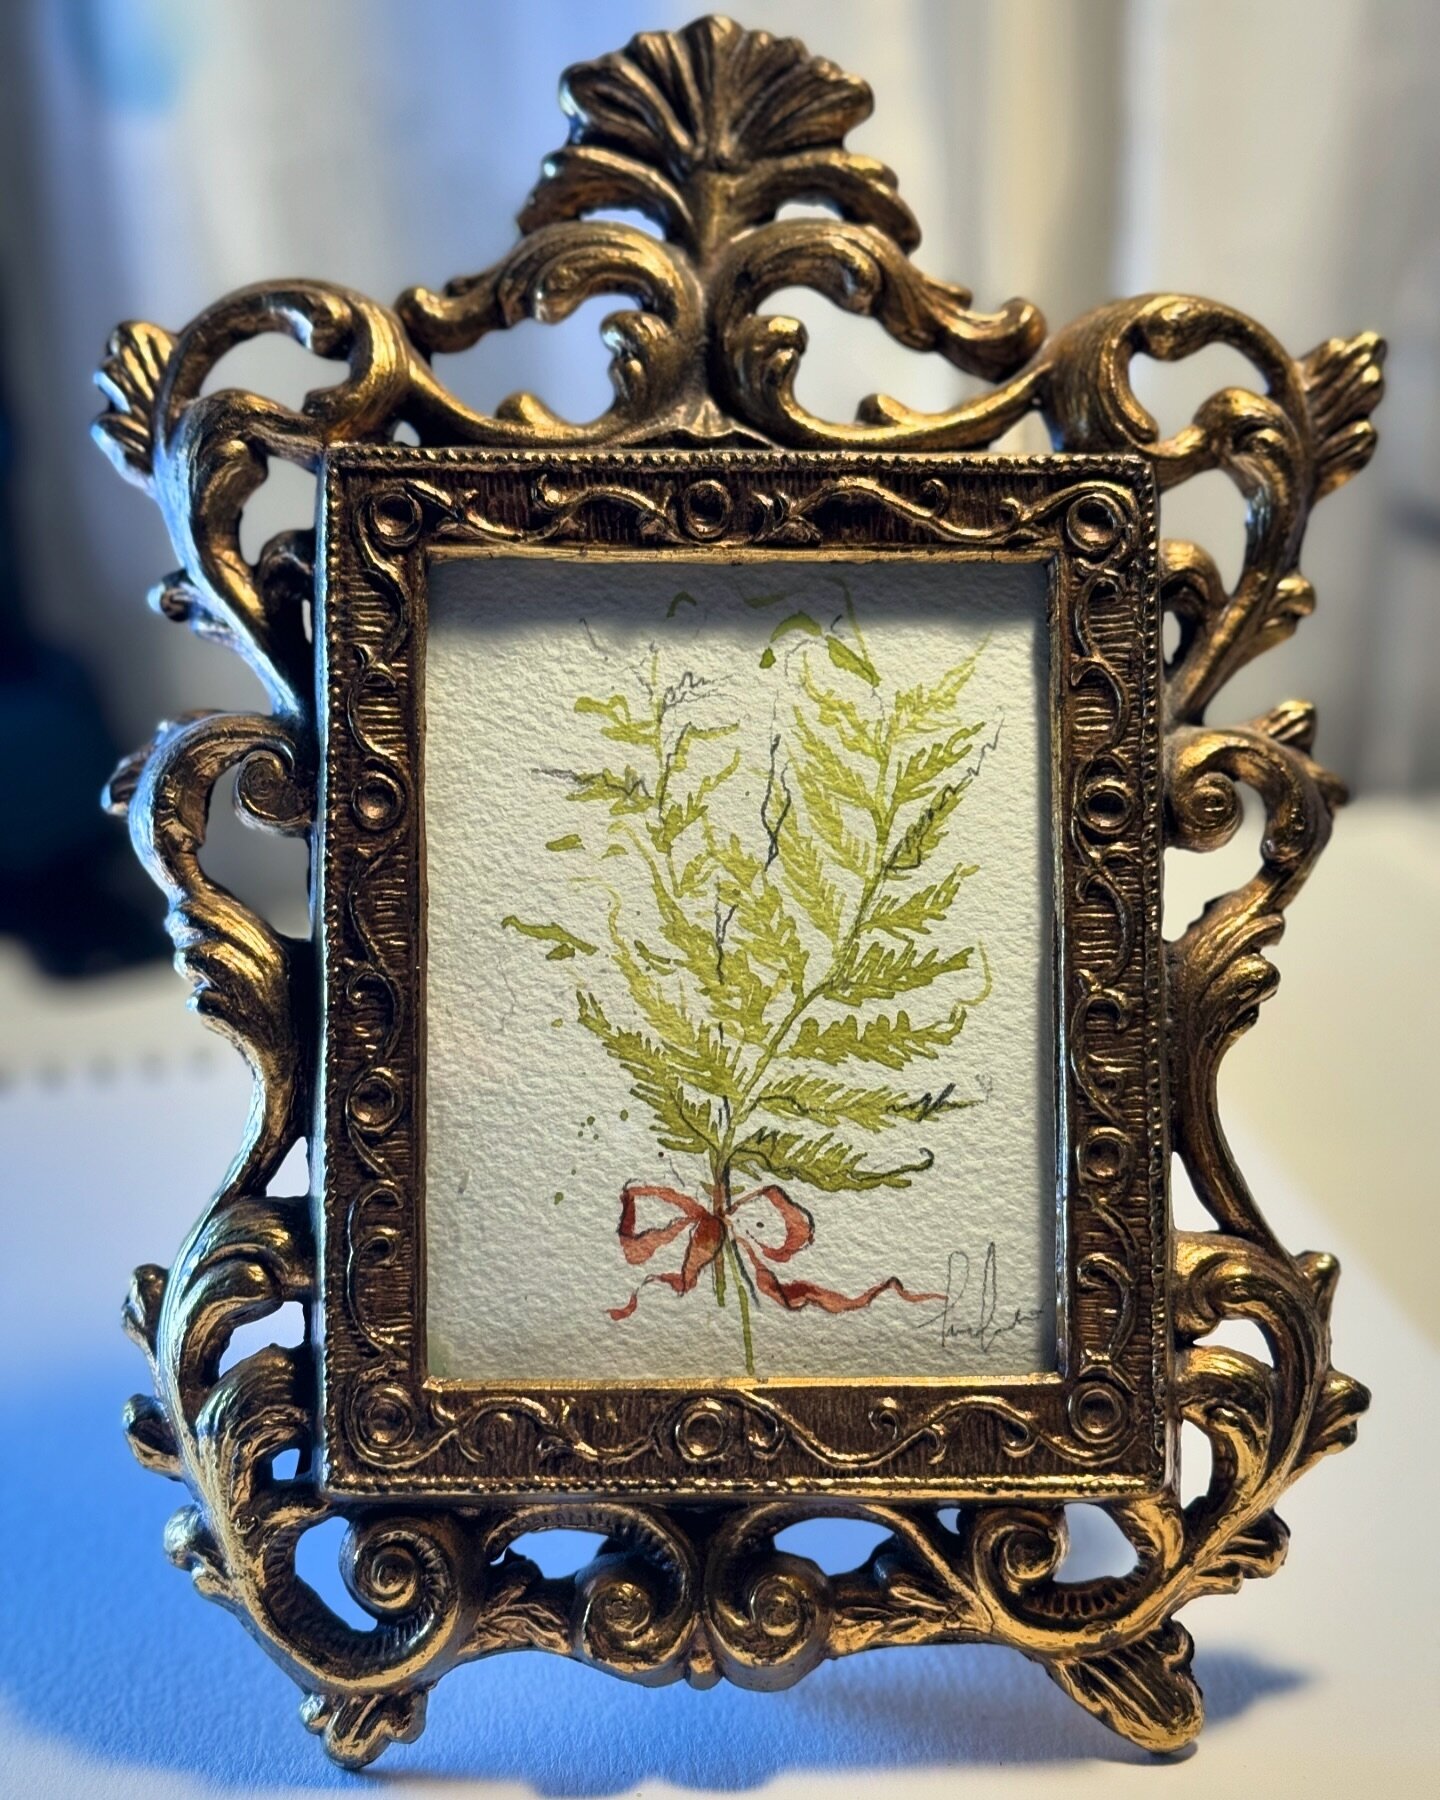 I found this vintage frame in a thrift store in Leesburg and I LOVE it. I think the delicate ferns are a fun juxtaposition. 
.
Starting to warm up so that I can turn my focus toward finishing a new botanic collection for a show in early May. I&rsquo;